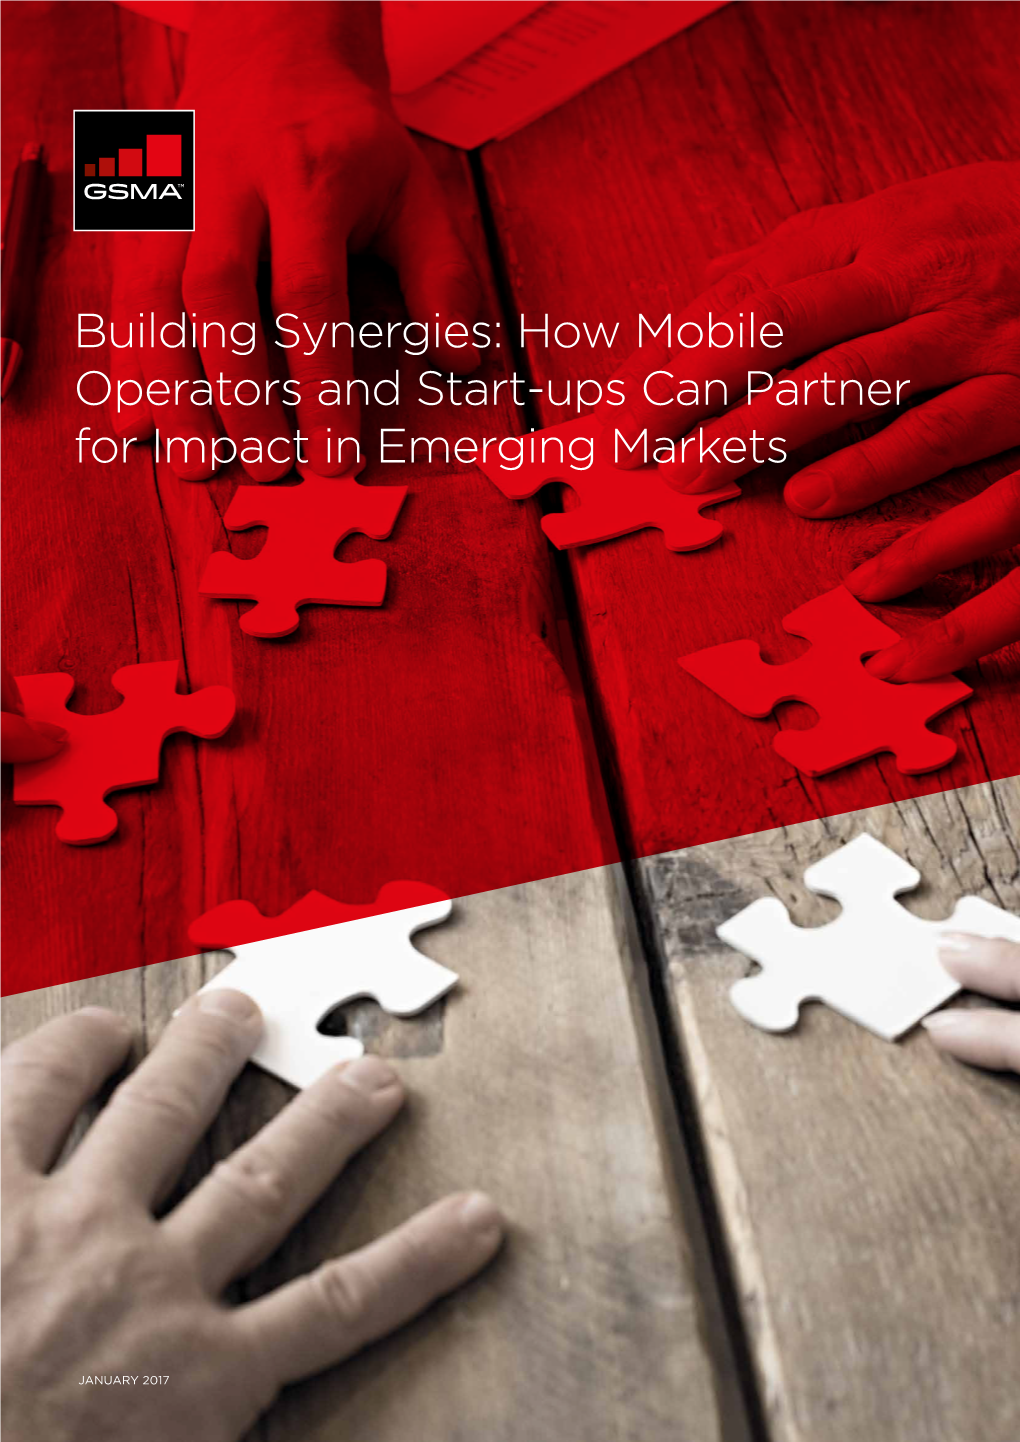 How Mobile Operators and Start-Ups Can Partner for Impact in Emerging Markets